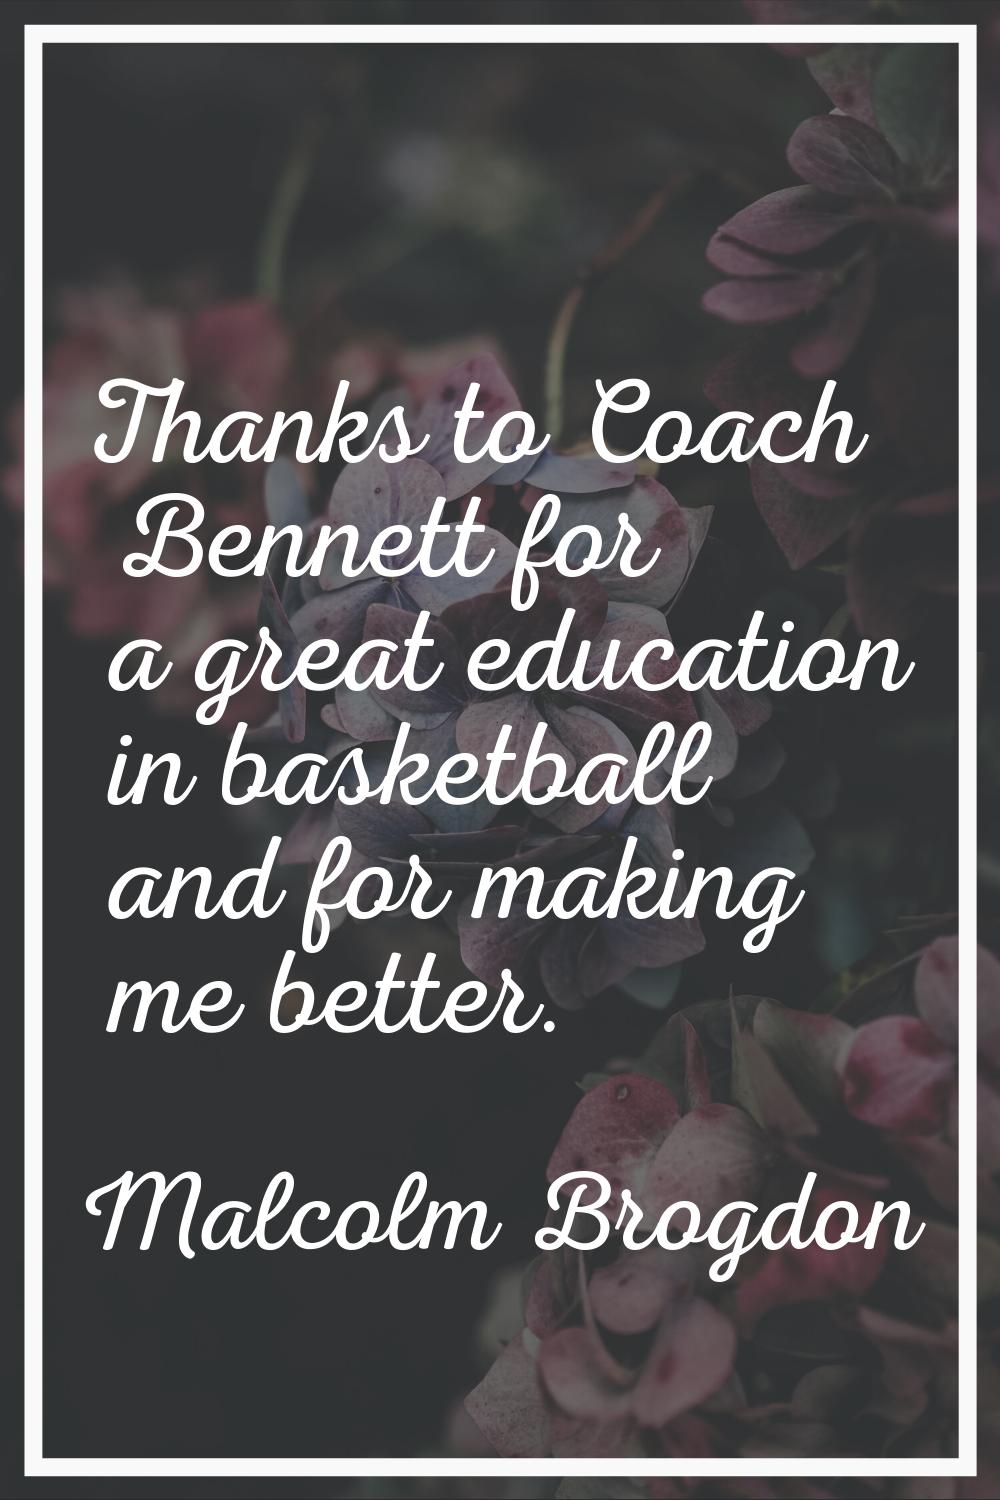 Thanks to Coach Bennett for a great education in basketball and for making me better.